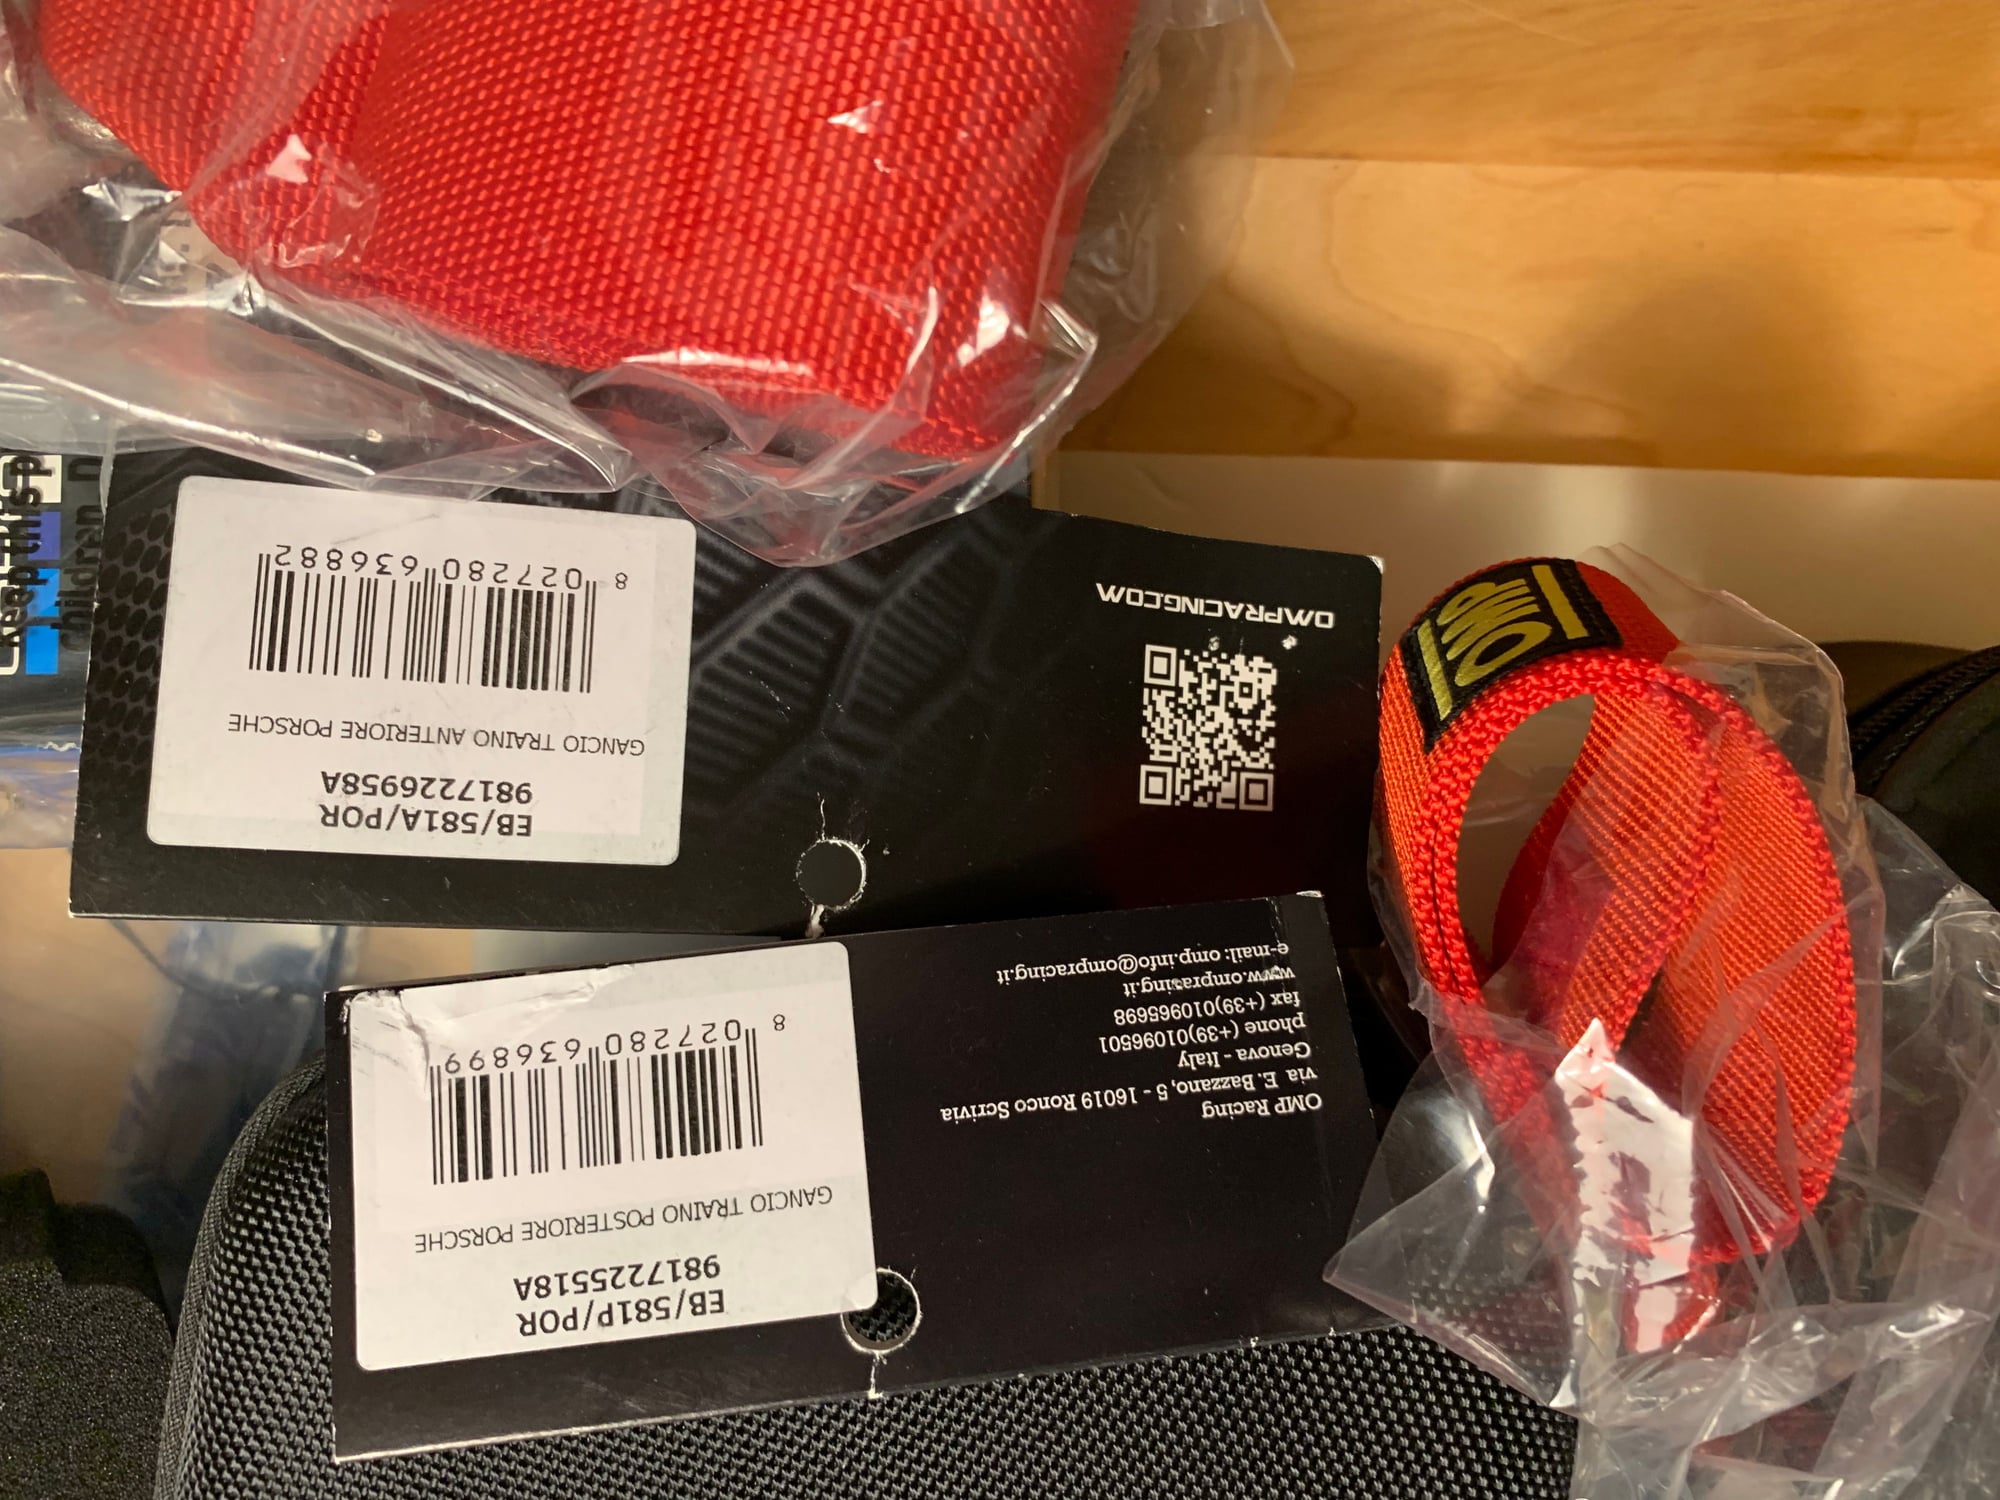 Accessories - For Sale: Authentic Porsche Motorsport OMP Tow Hook Straps - New - 2014 to 2016 Porsche GT3 - 2013 to 2019 Porsche 911 - 2013 to 2019 Porsche Boxster - 2013 to 2019 Porsche 718 Boxster - 2014 to 2019 Porsche 718 Cayman - 2014 to 2019 Porsche Cayman - Santa Monica, CA 90404, United States